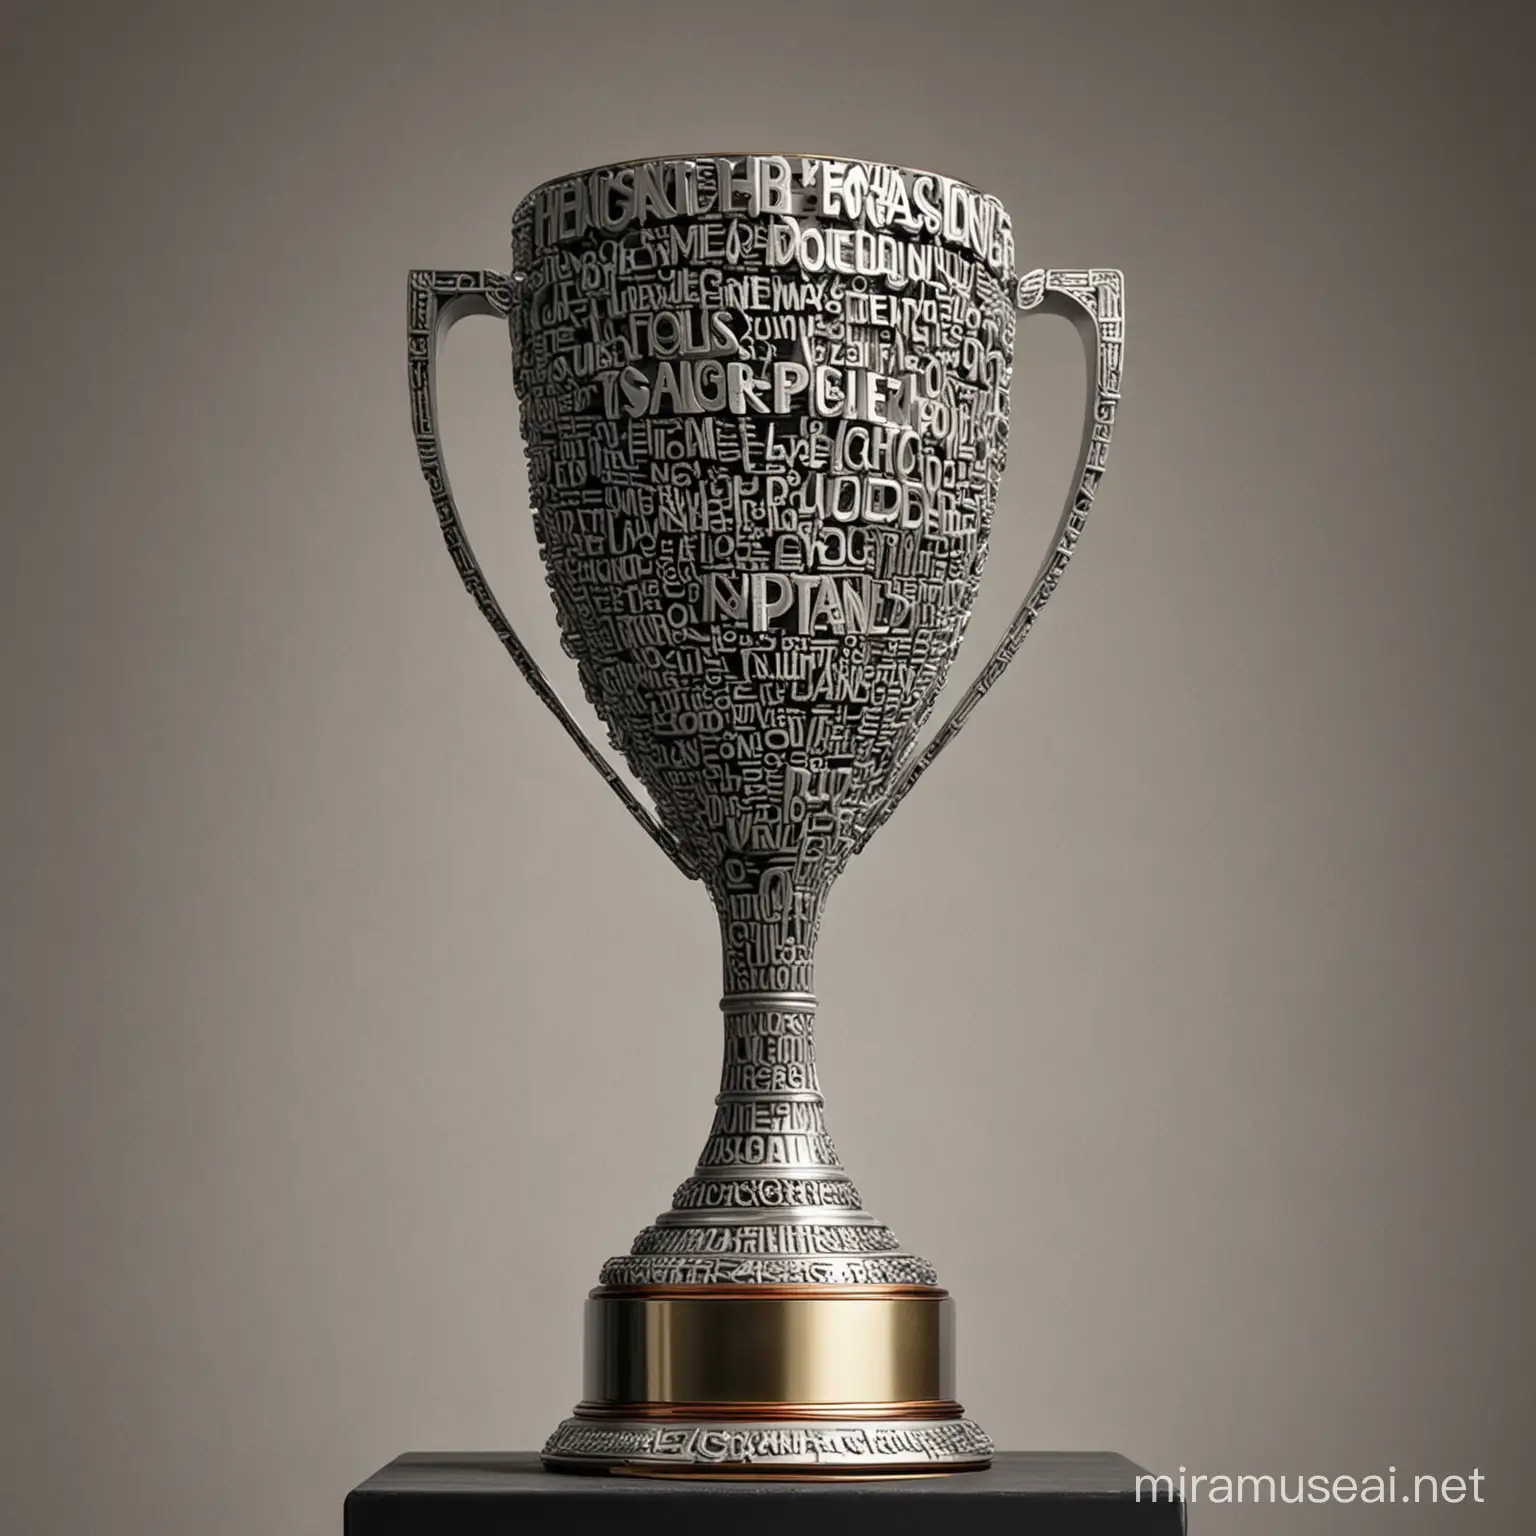 Decorative Trophy Covered in Elegant Calligraphy